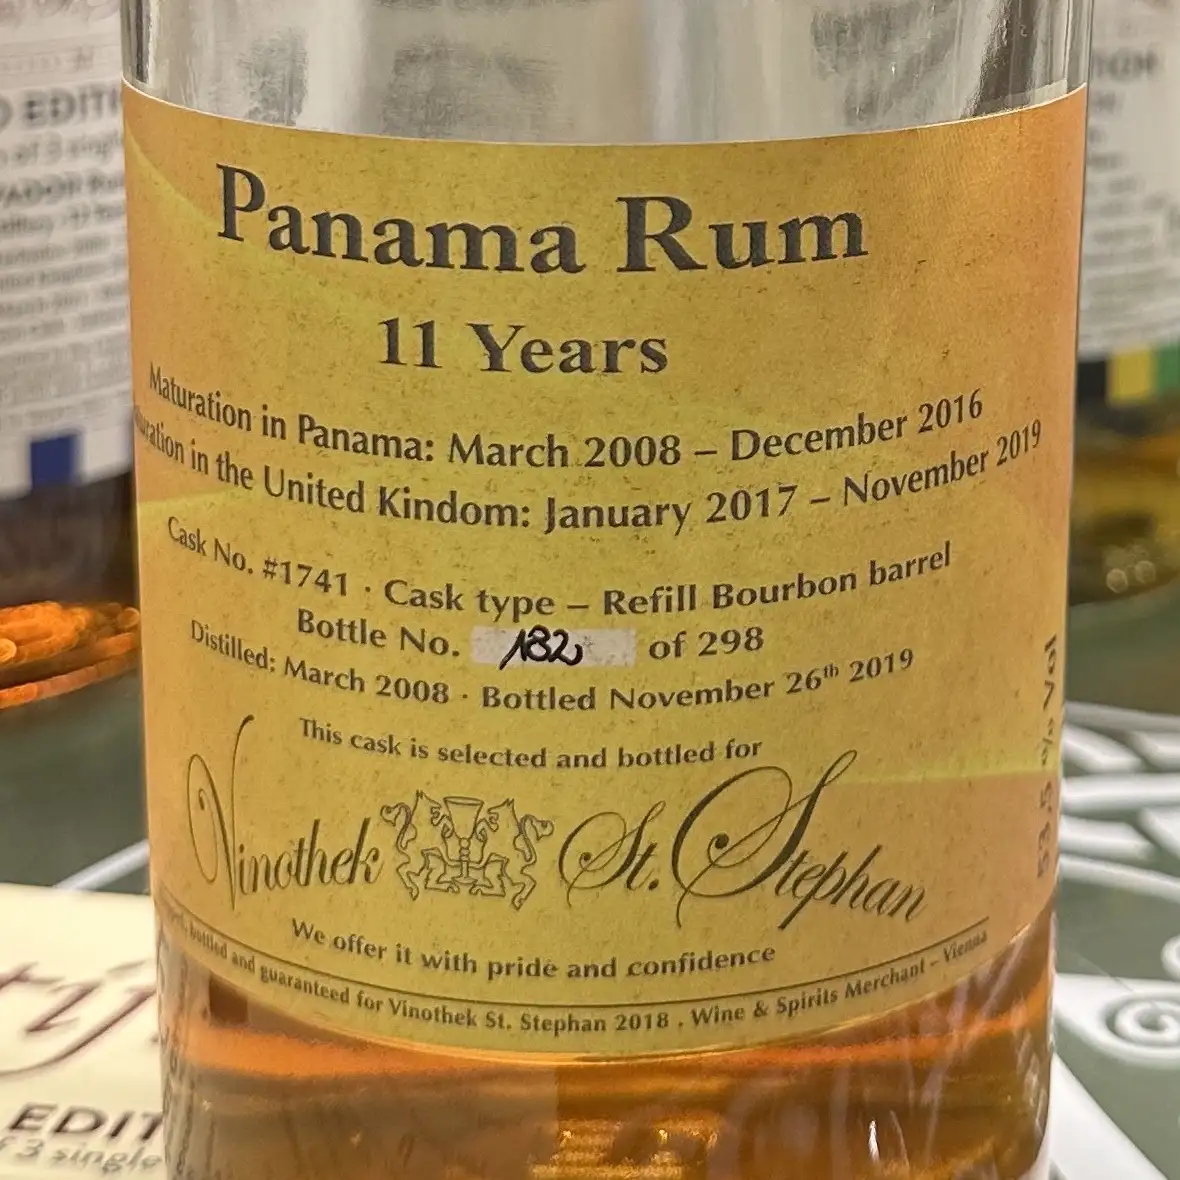 Image of the front of the bottle of the rum Panama 11 Years